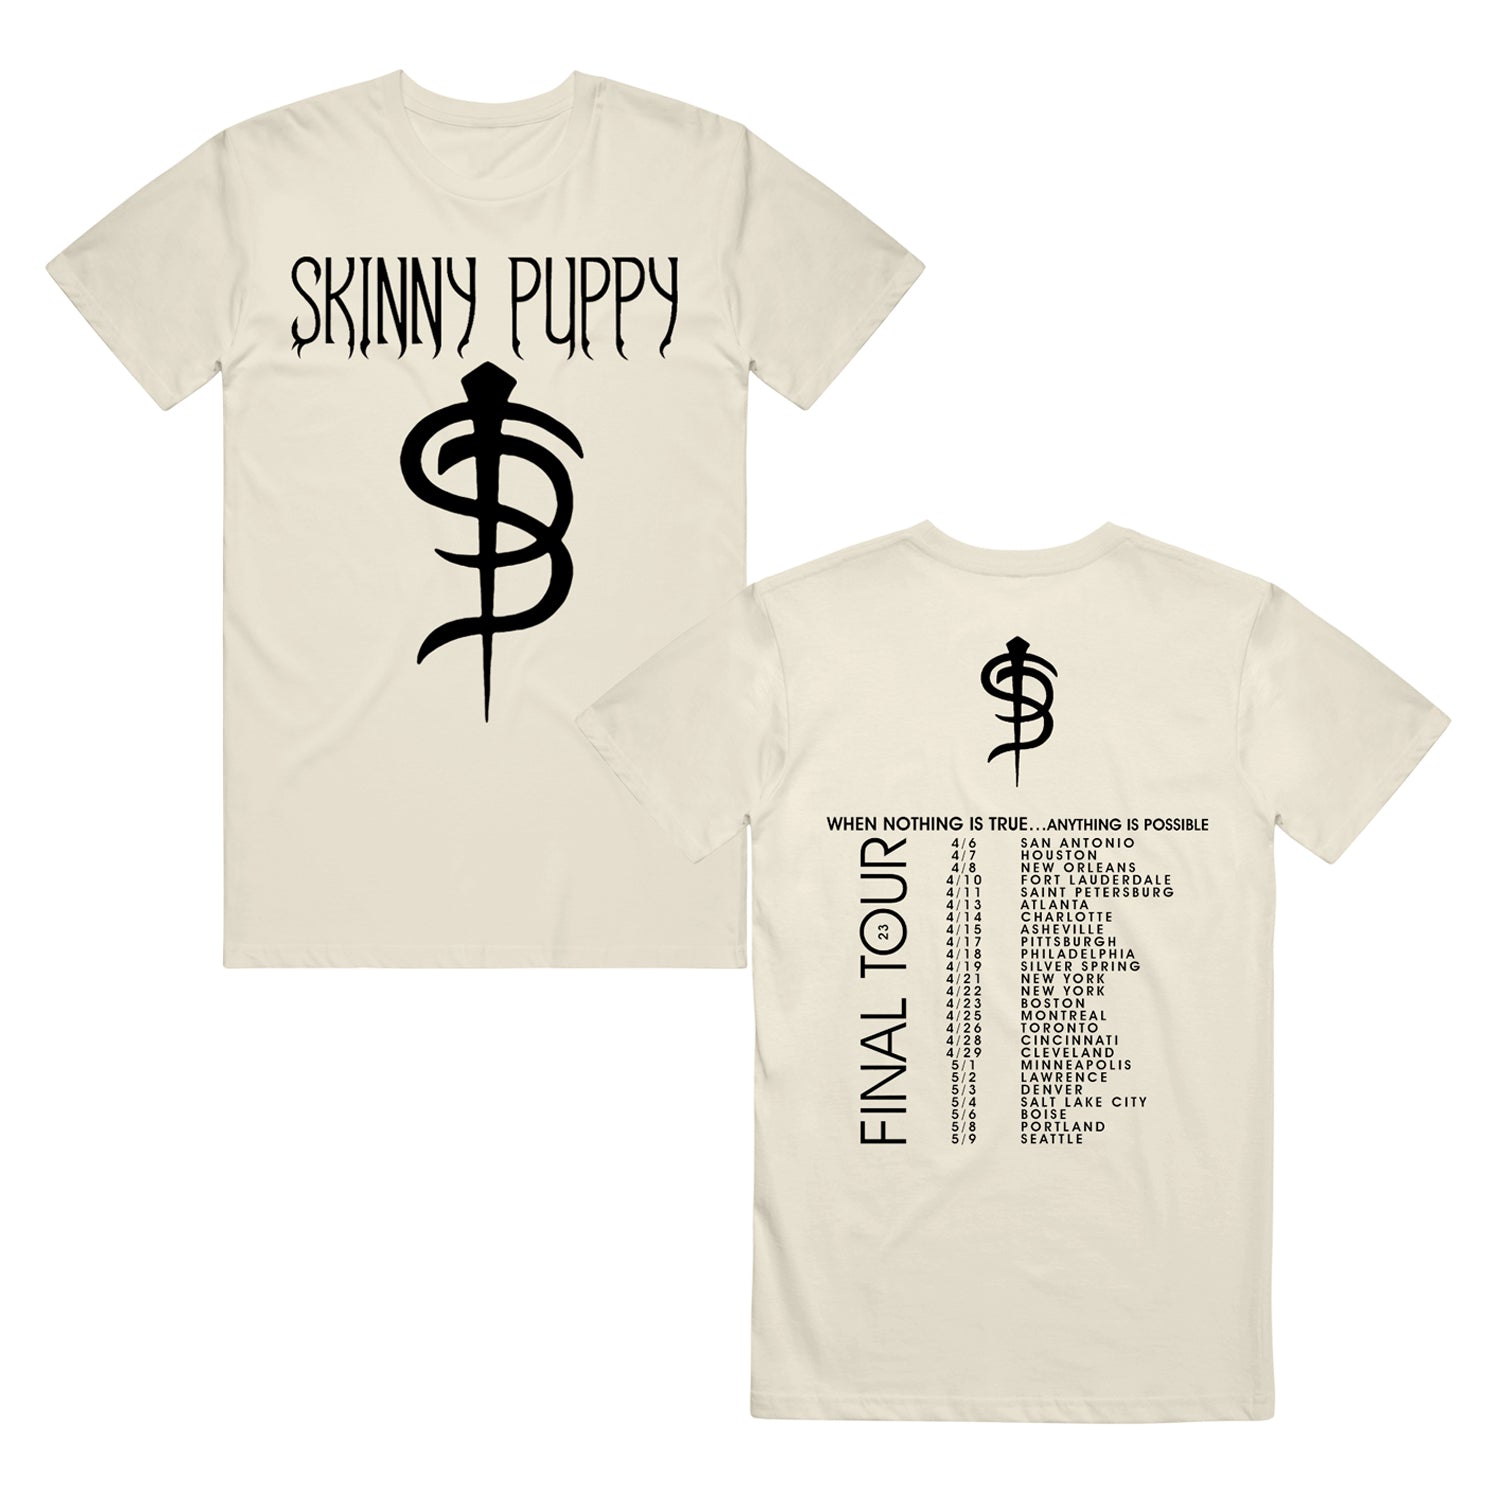 image of the front and back of a bone colored tee shirt on a white background. front is on the left and has a full body print in black of the logo and says skinny puppy across the chest 